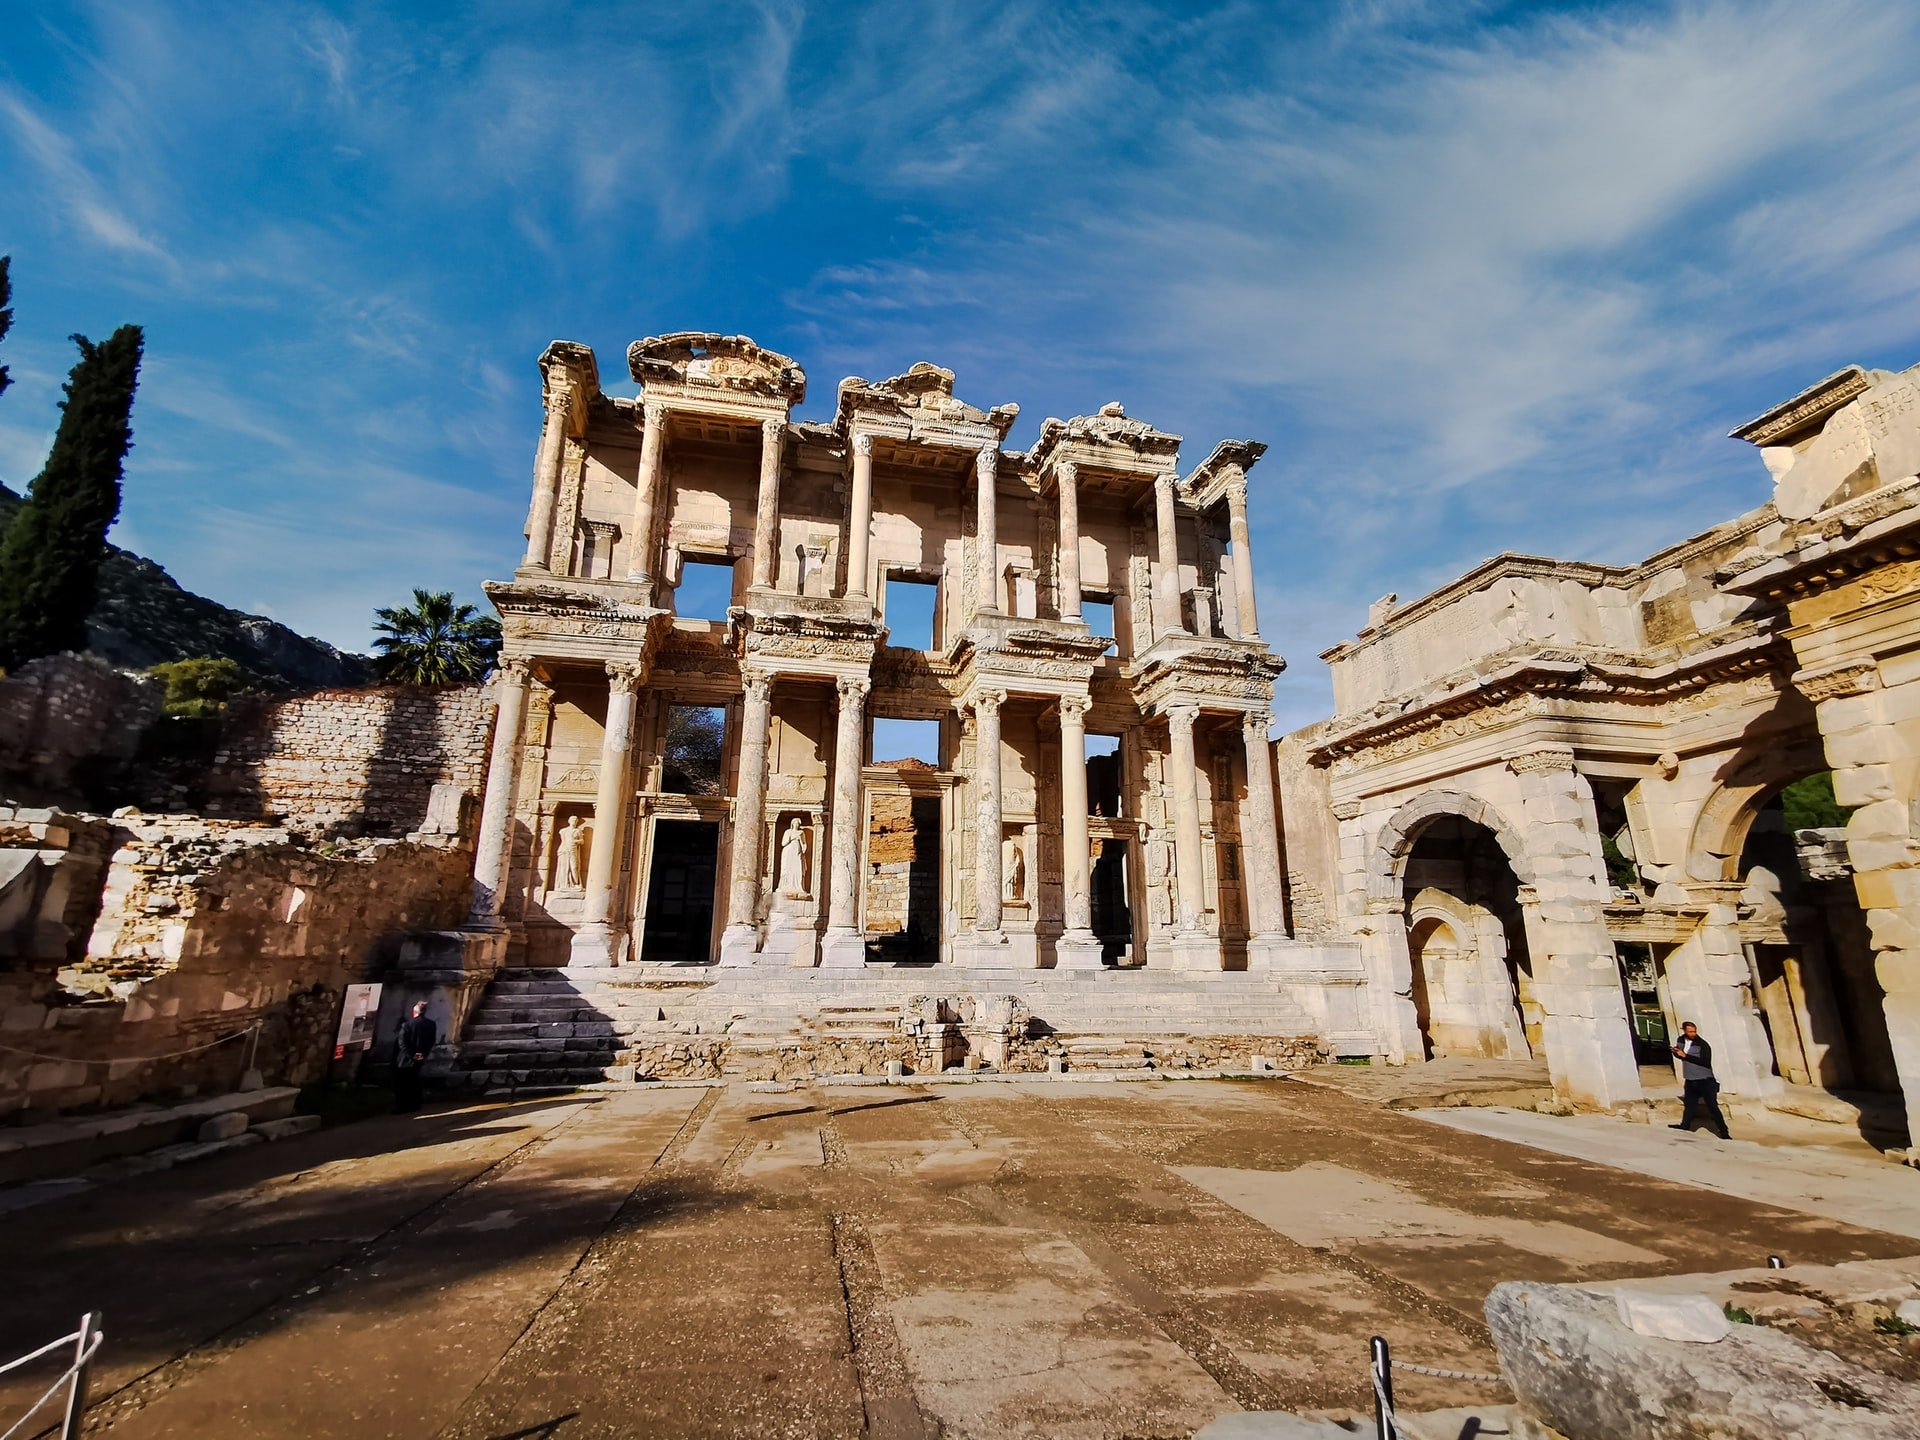 This image shows the impressive Celsus Library in Ephesus, one of the best historic sites in Turkey.